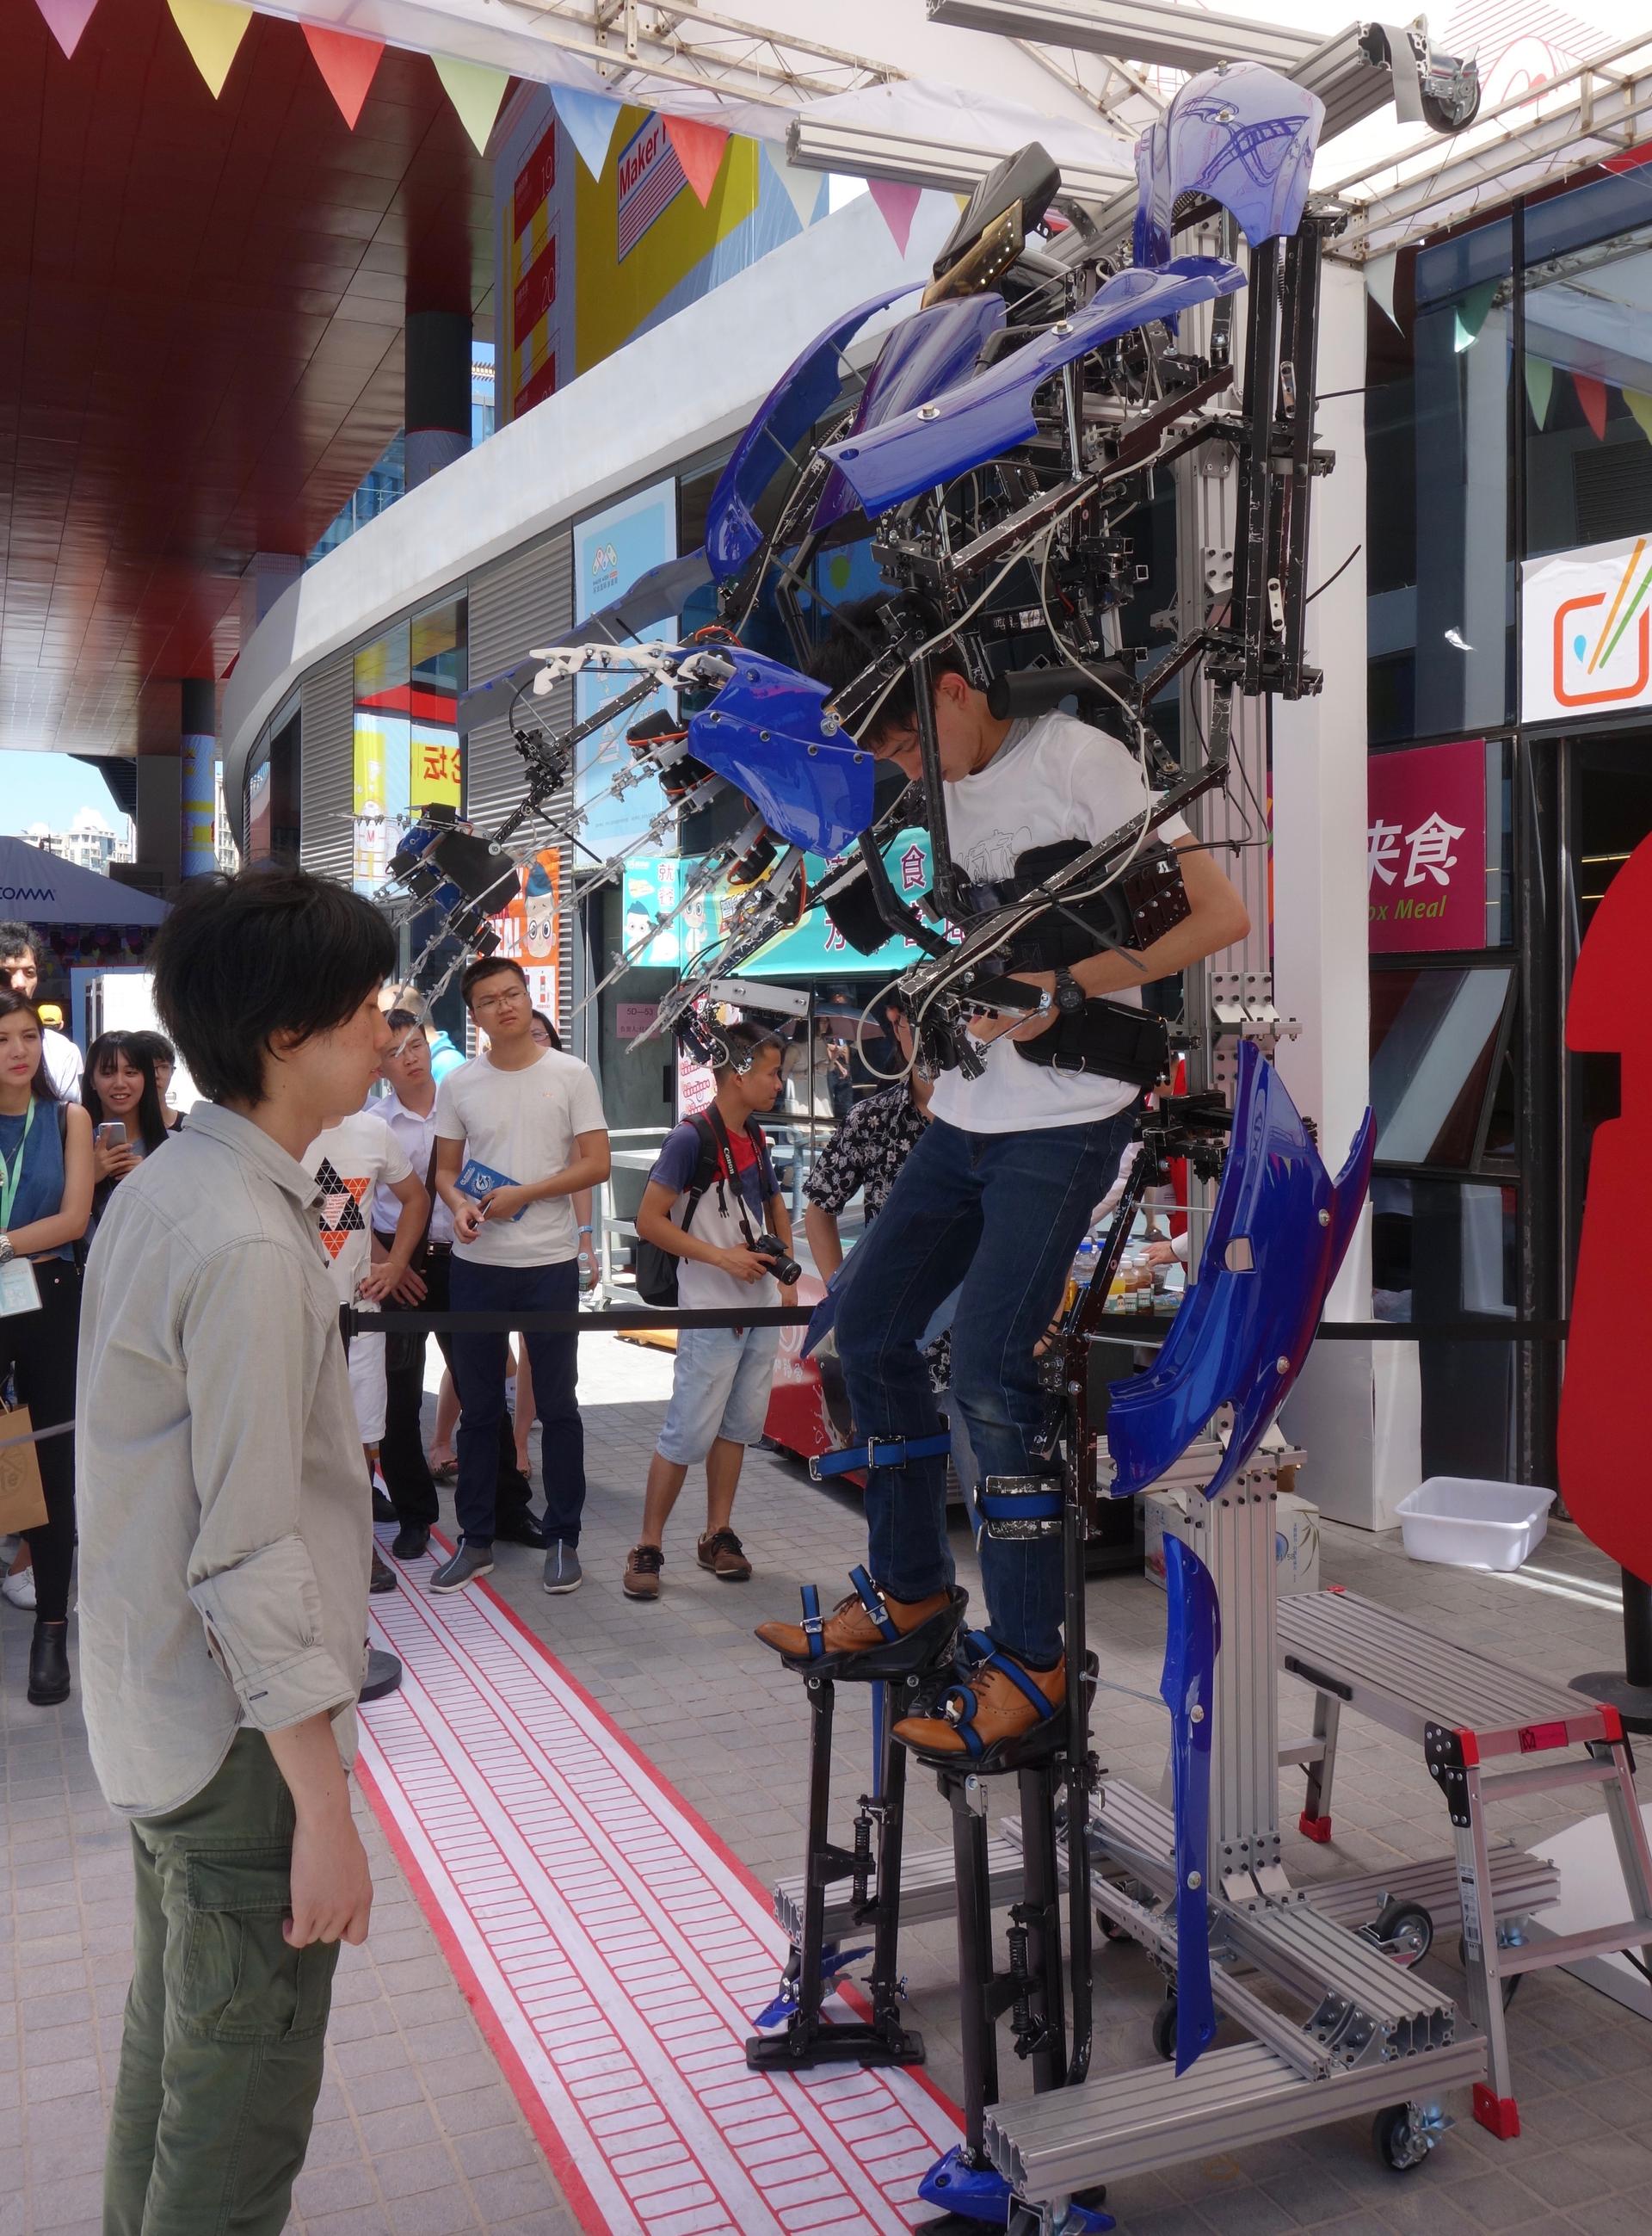 Stepping into a robot suit at the 2015 Shenzhen Maker Faire